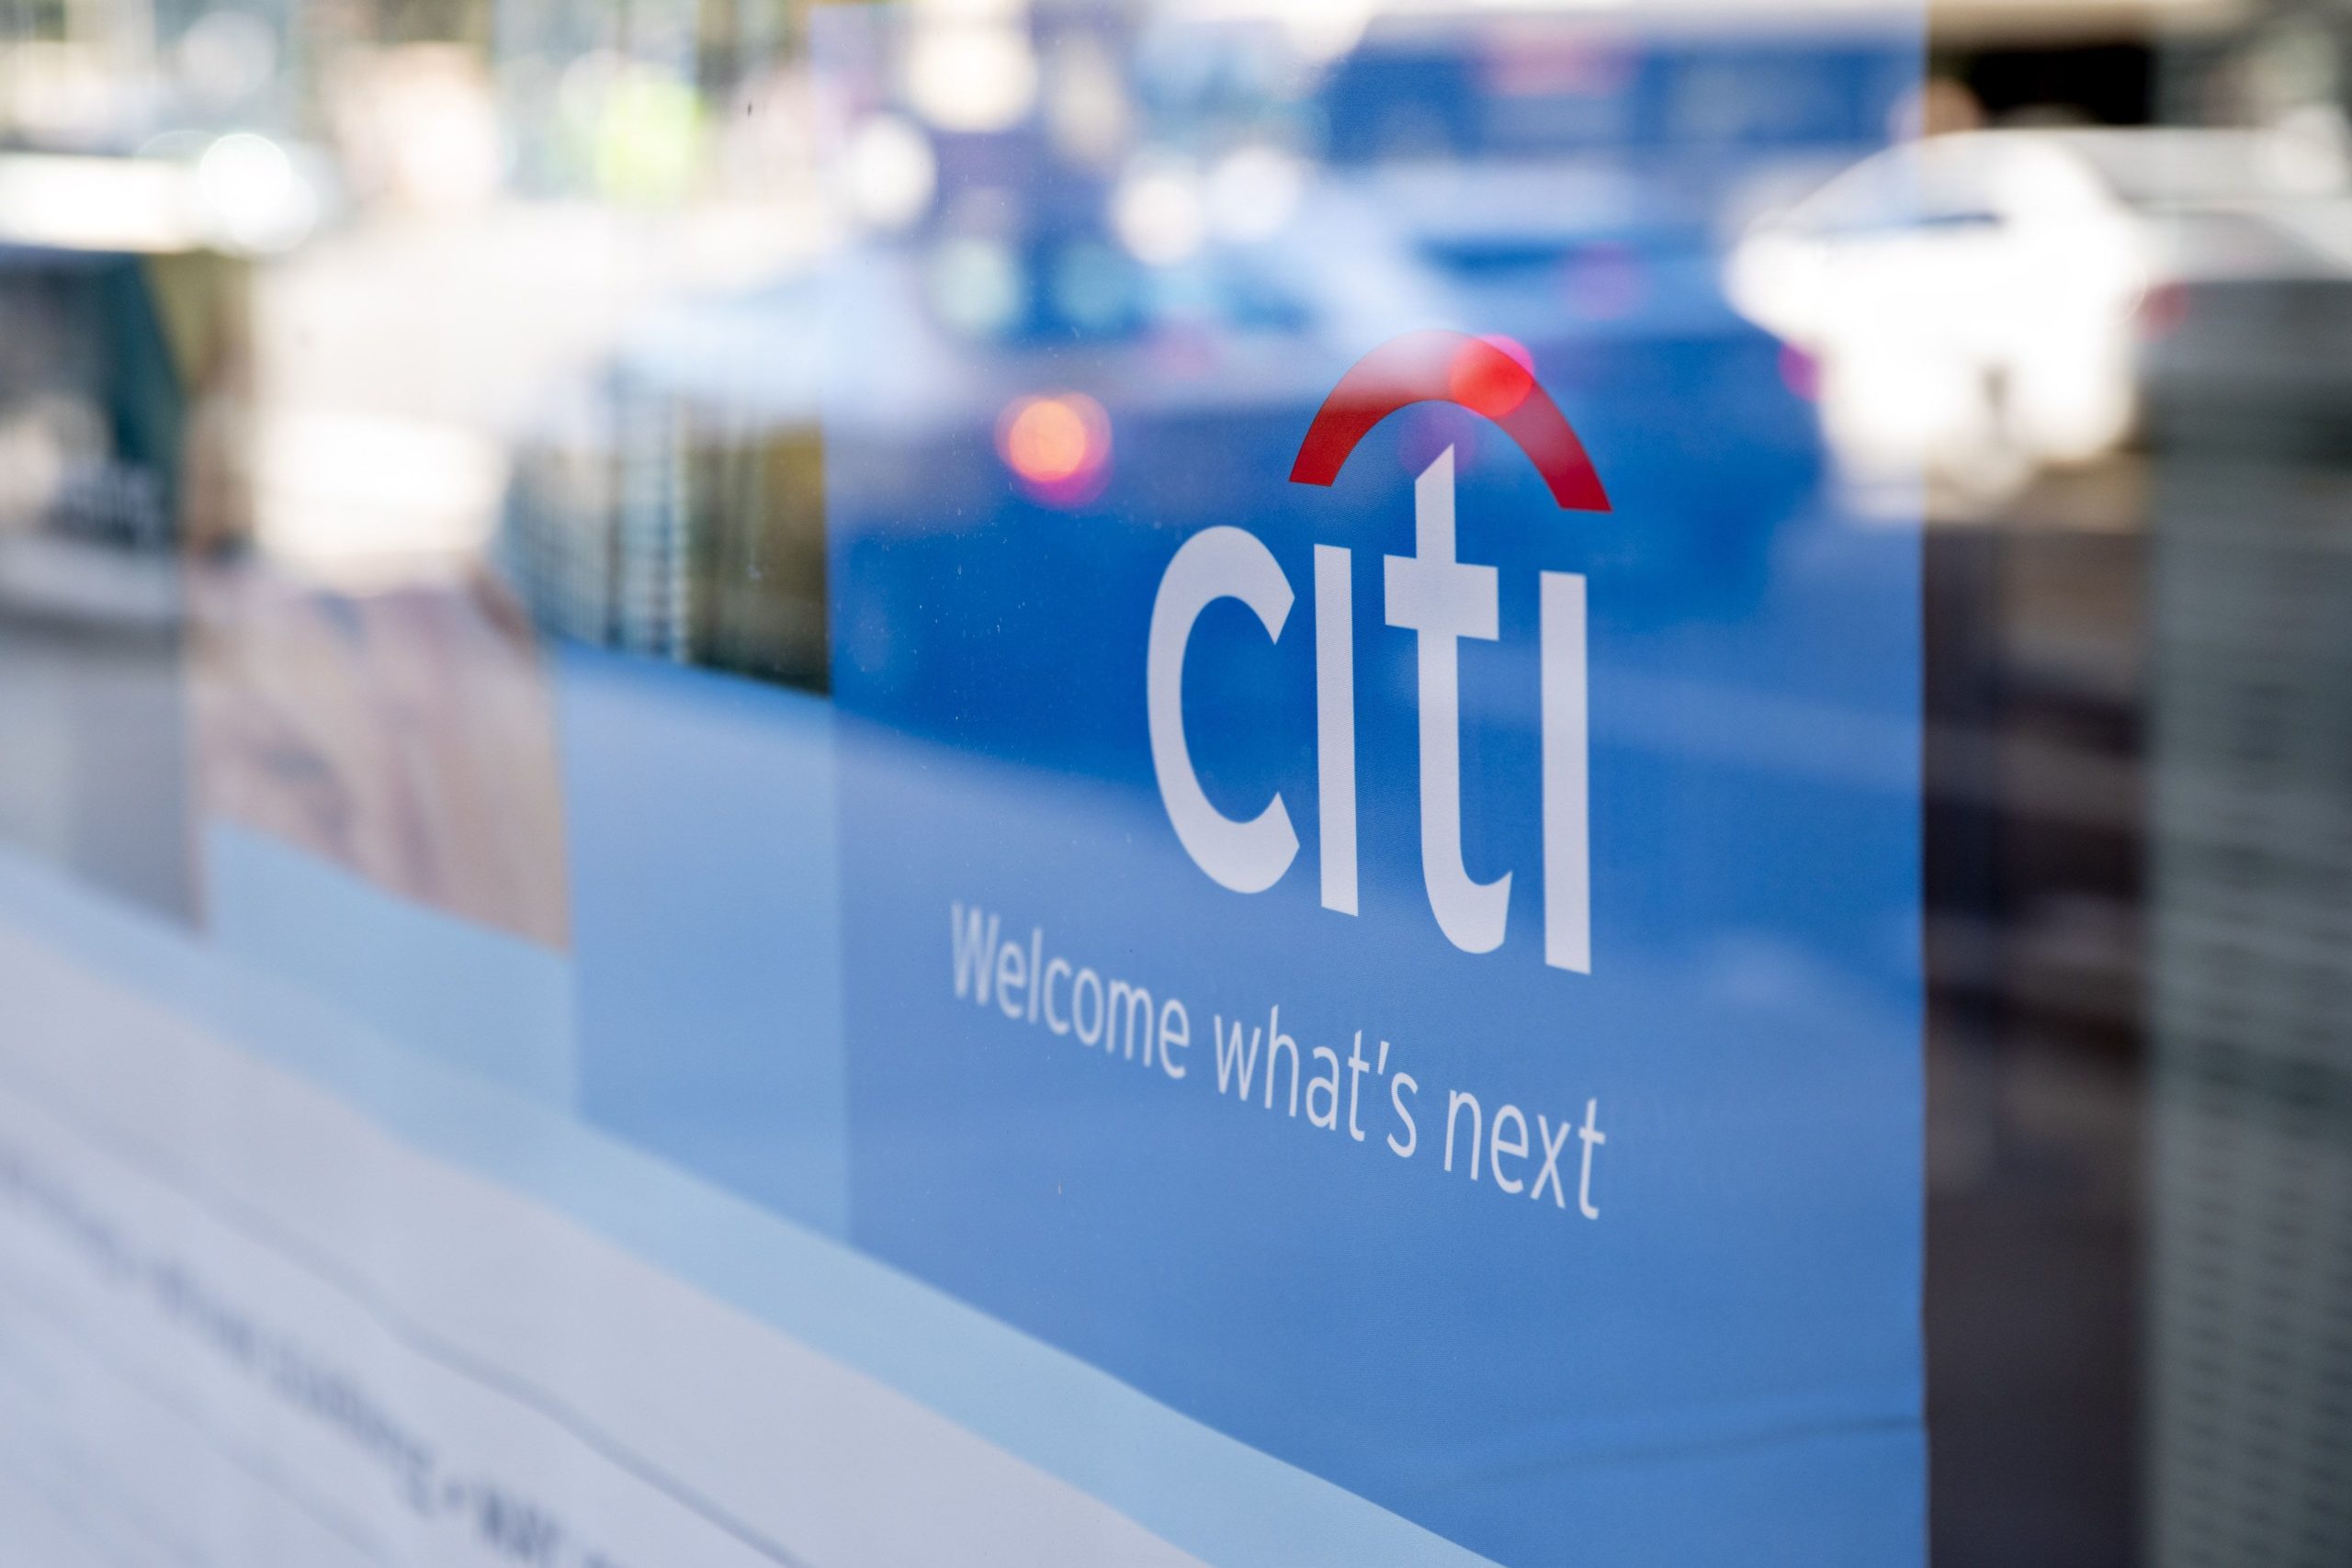 Citi leads the way in startup-oriented product development.